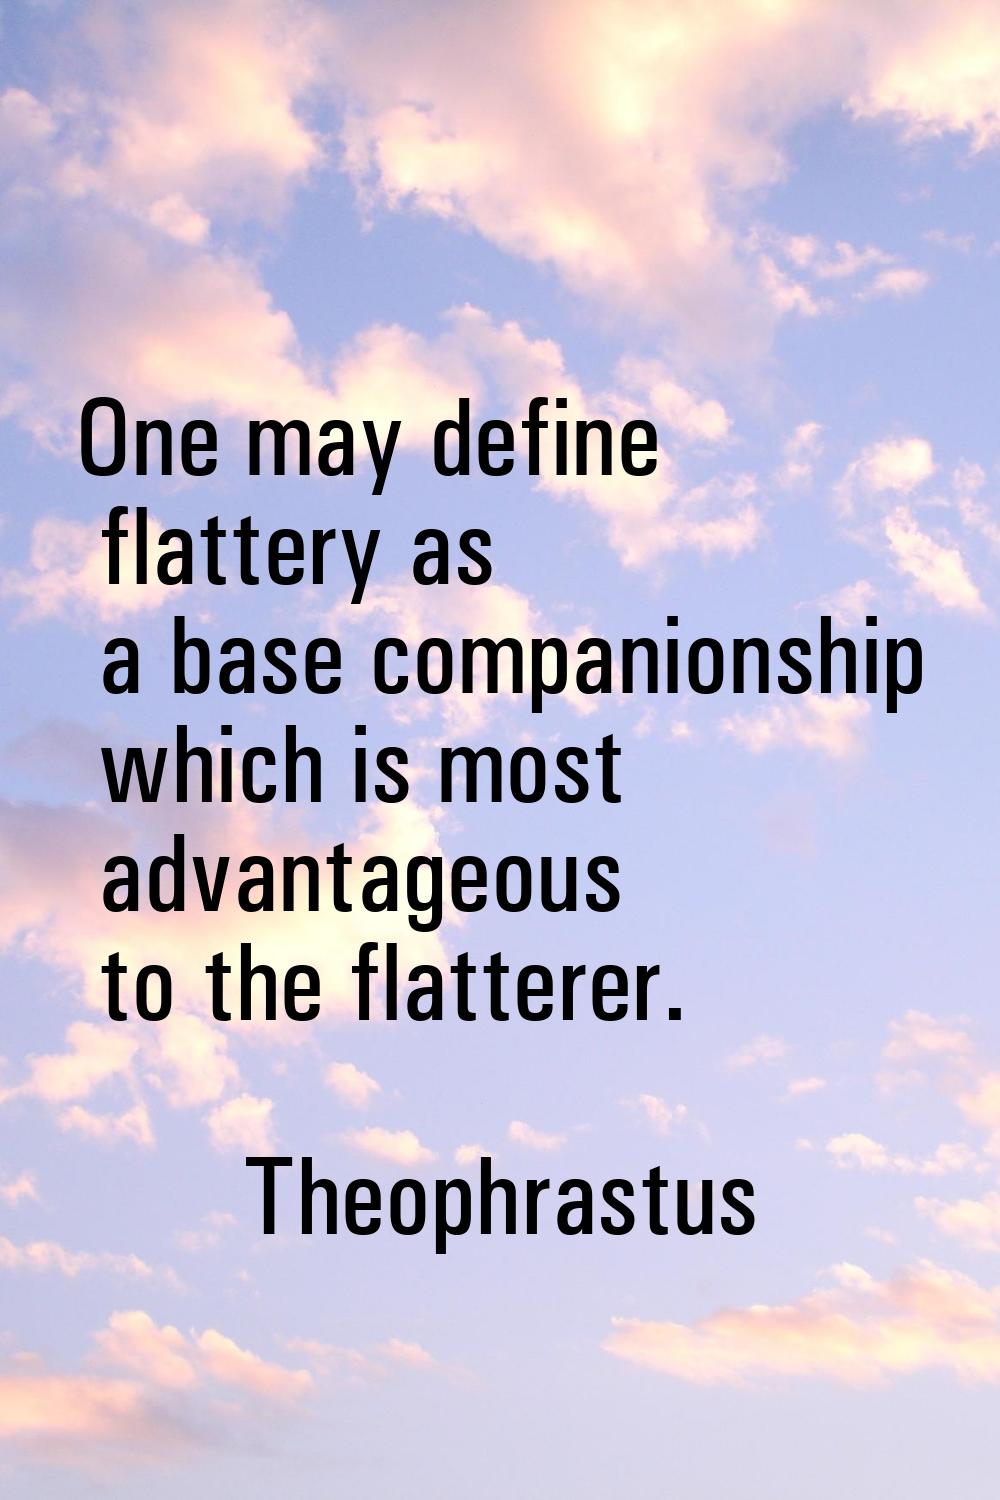 One may define flattery as a base companionship which is most advantageous to the flatterer.